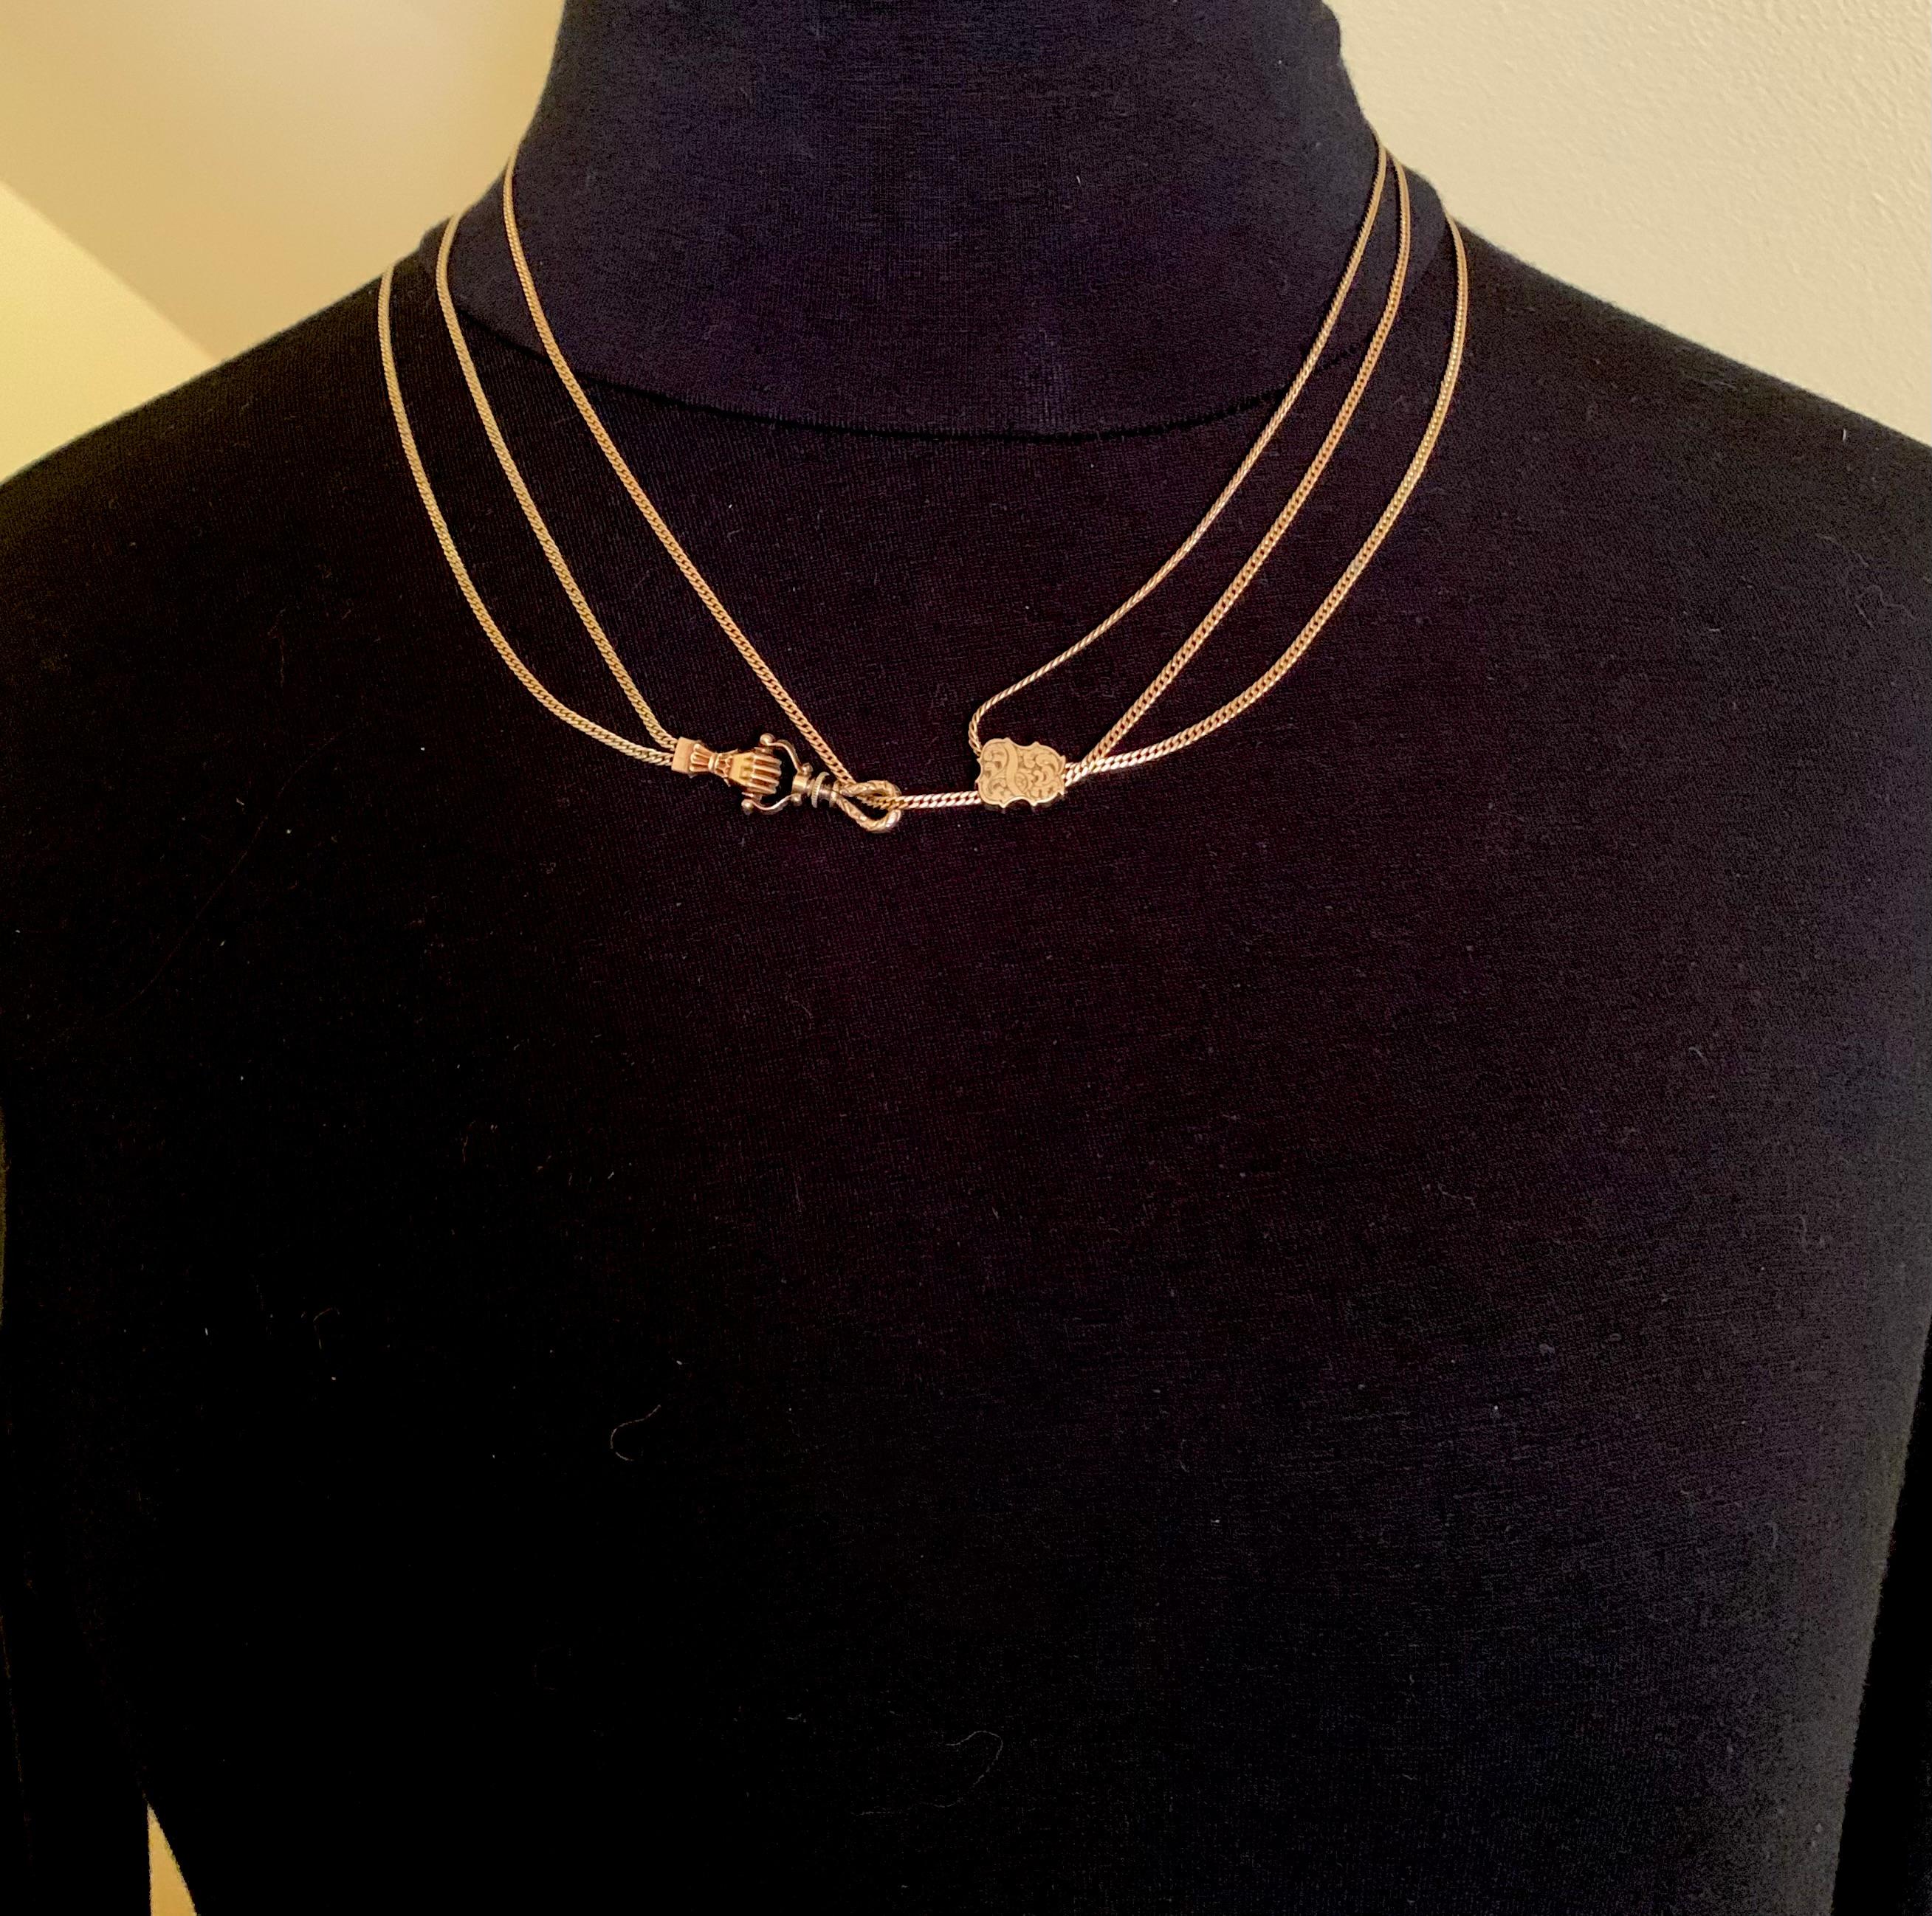 Exceptionally Long Antique 18K Gold Mano Sautoir Slide Chain Necklace Circa 1840 For Sale 12